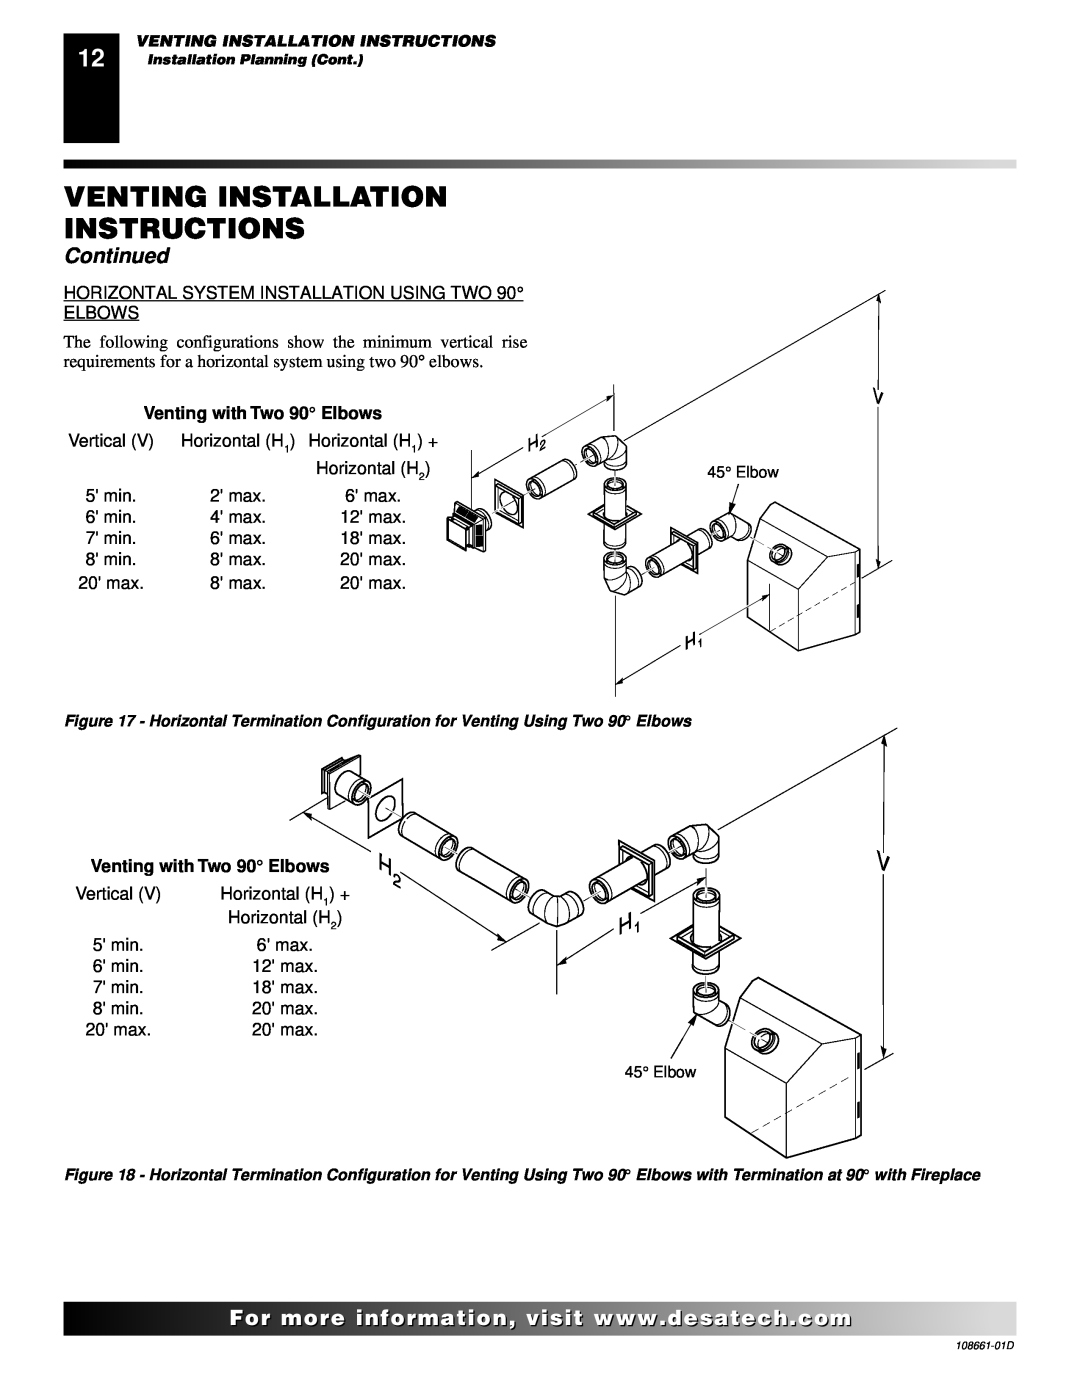 Desa (V)T32N, (V)T36N SERIES, CTDV36NR Venting Installation Instructions, Continued, Venting with Two 90 Elbows 